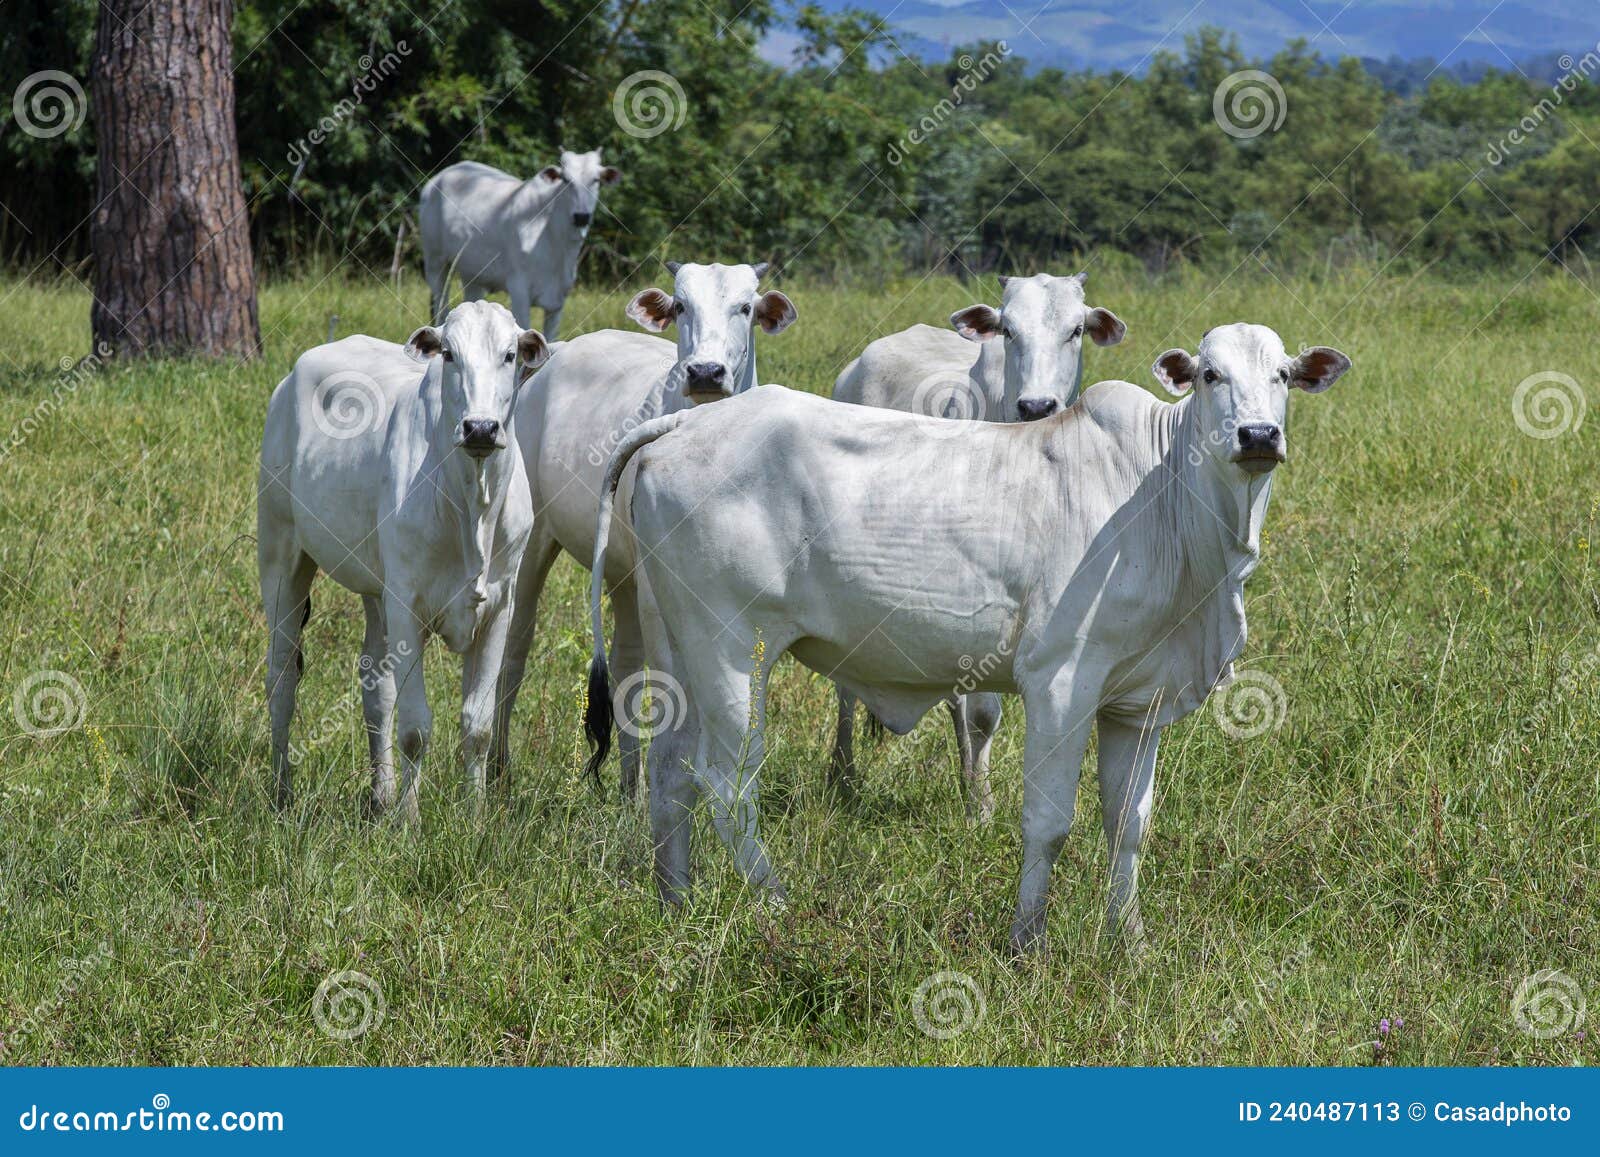 nellore cattle steers on green pasture